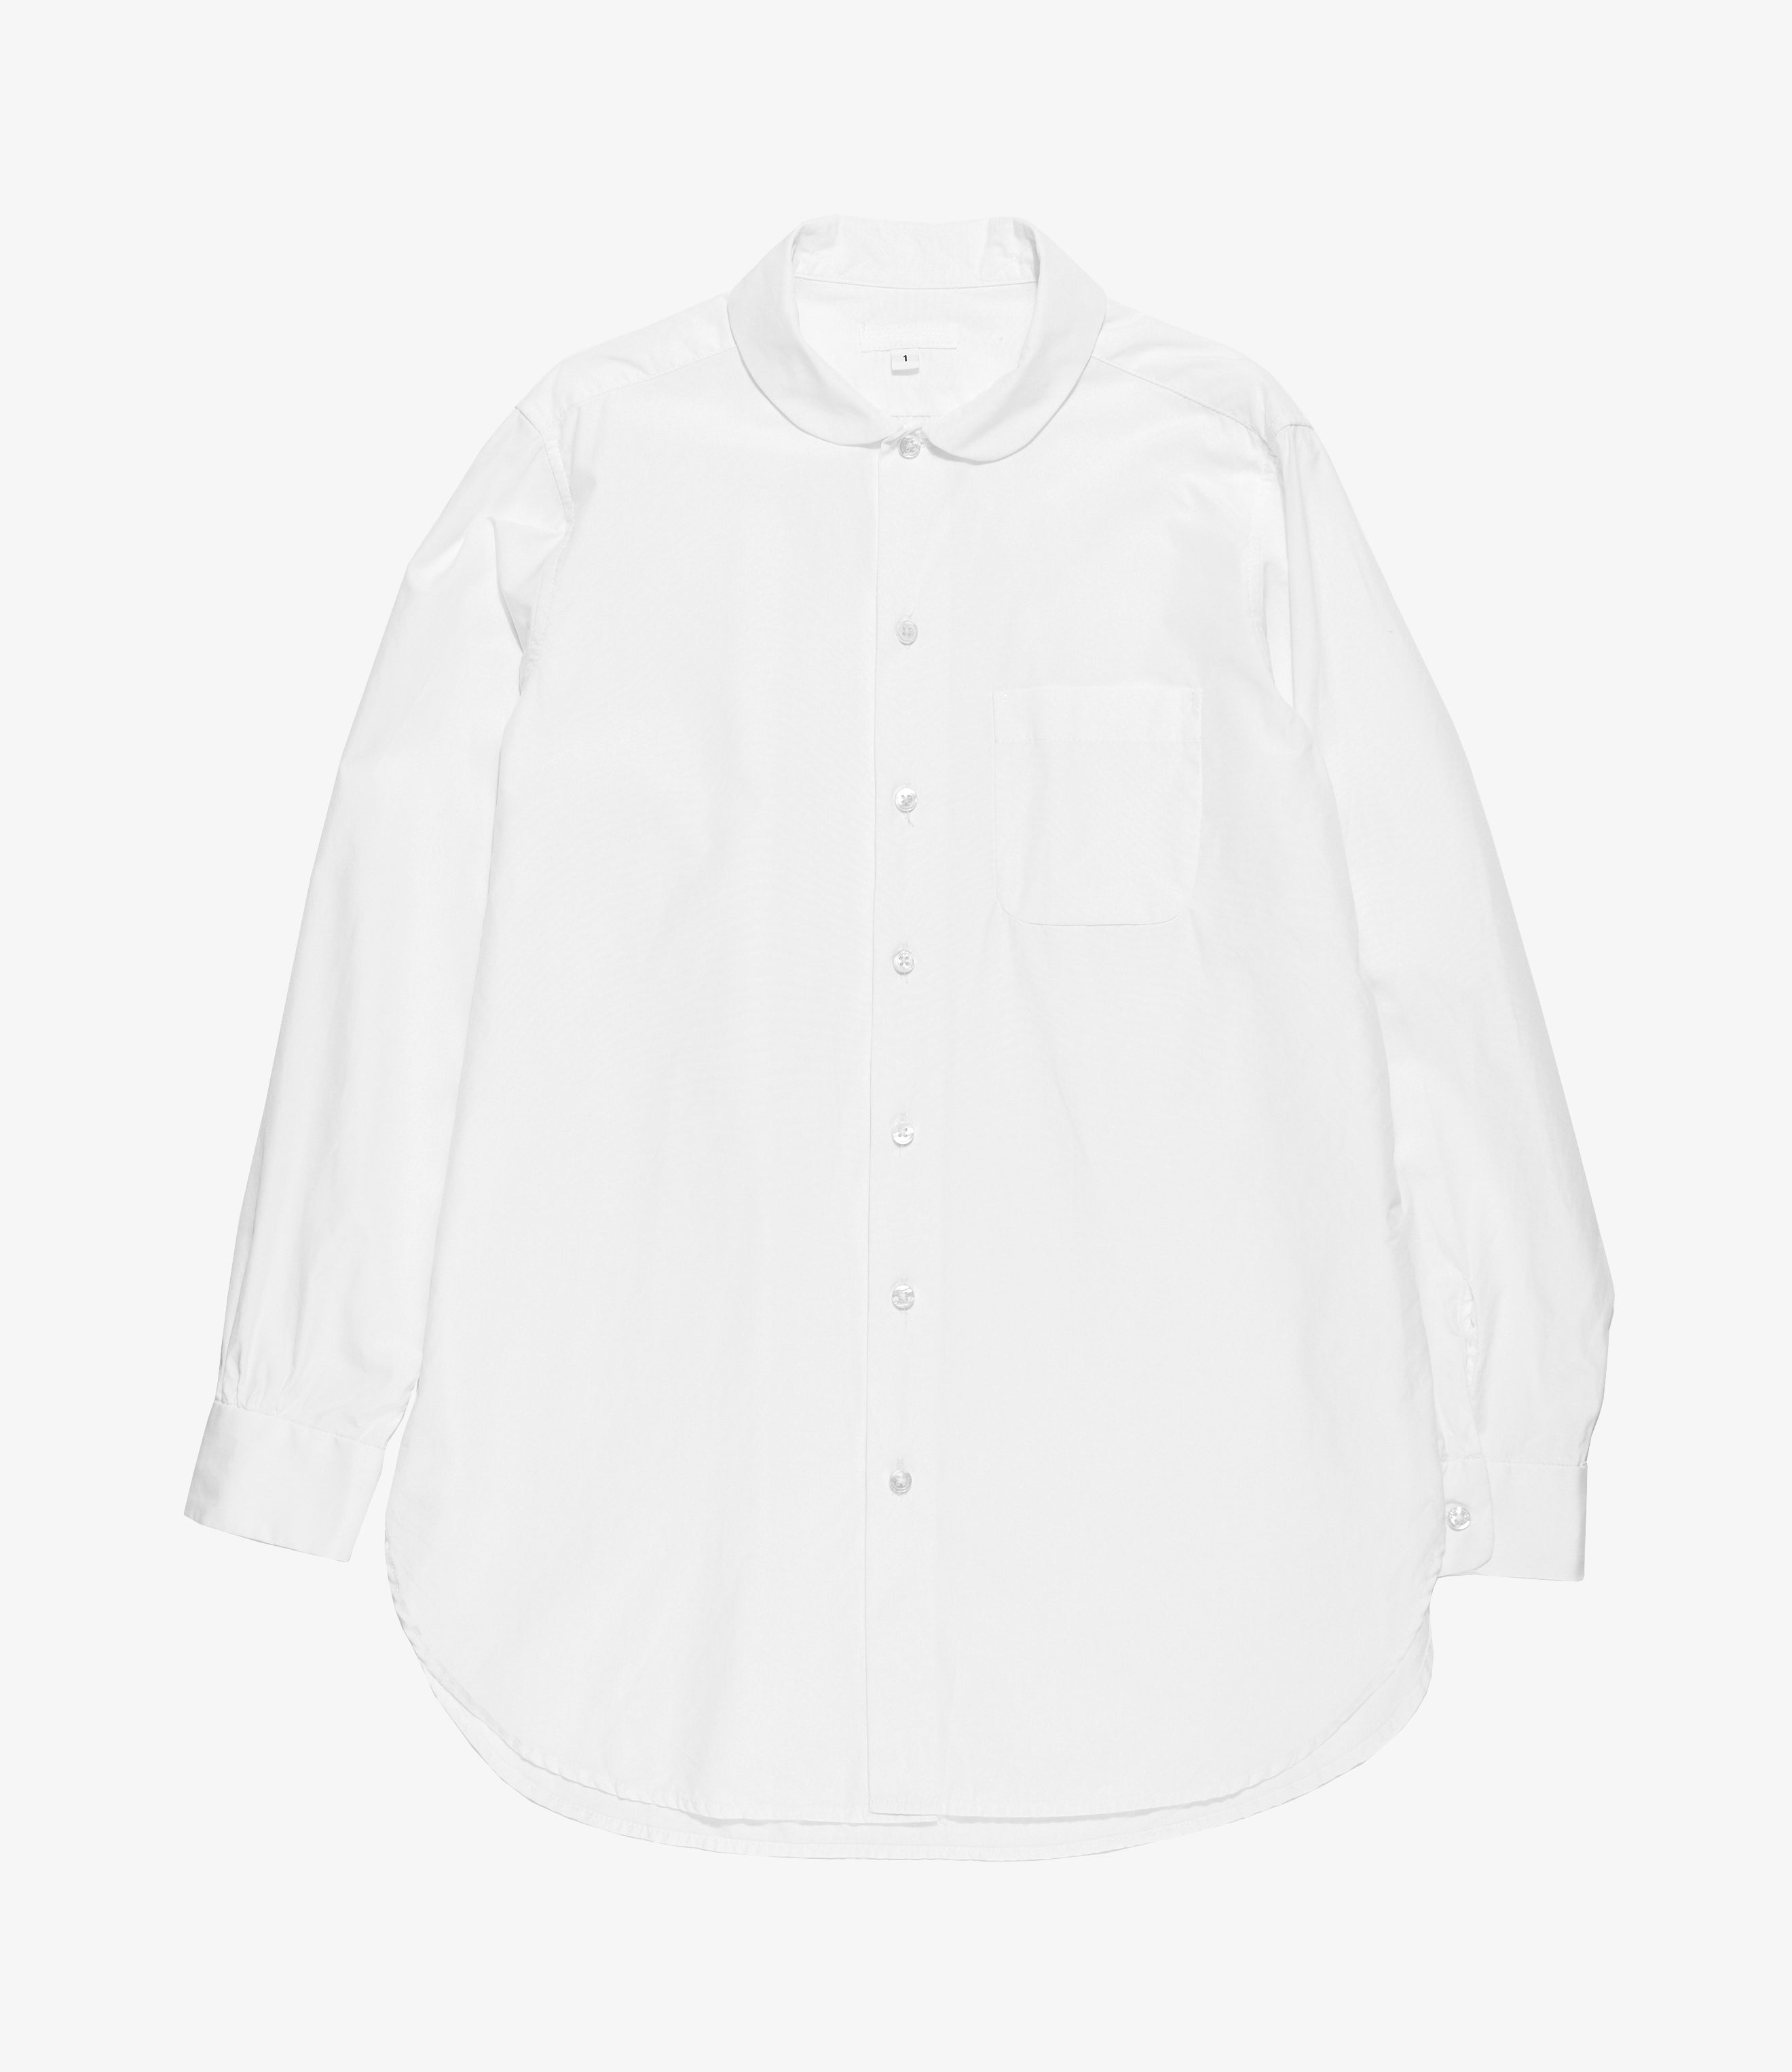 Engineered Garments Rounded Collar Shirt - White 100's 2Ply Broadcloth